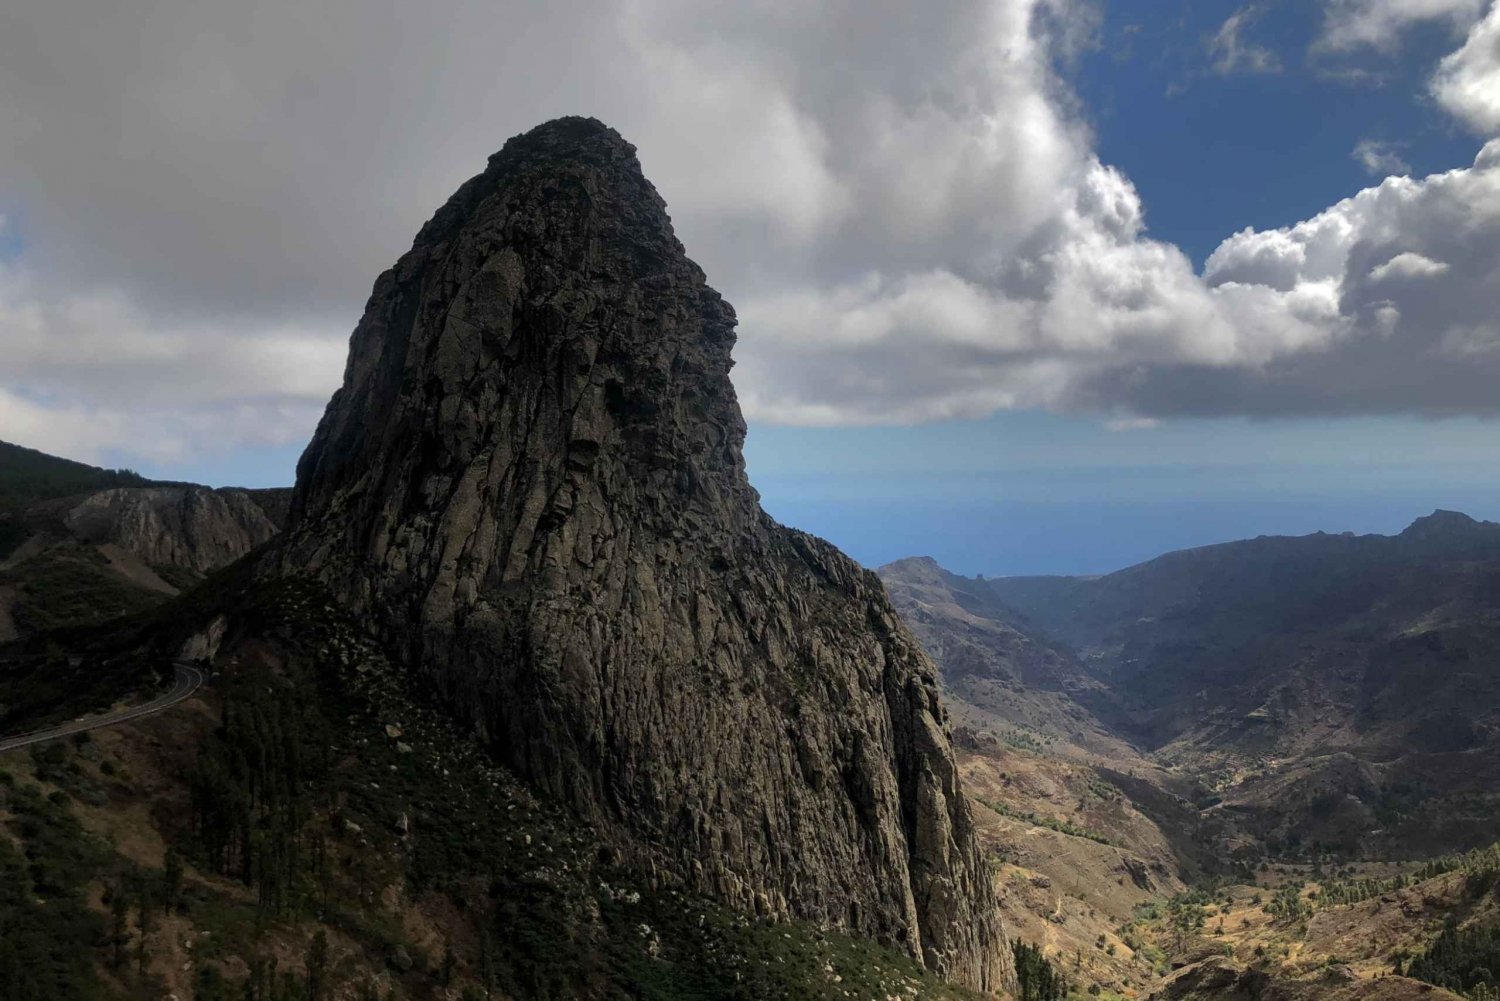 From Tenerife: Guided Tour to La Gomera with Ferry Ticket